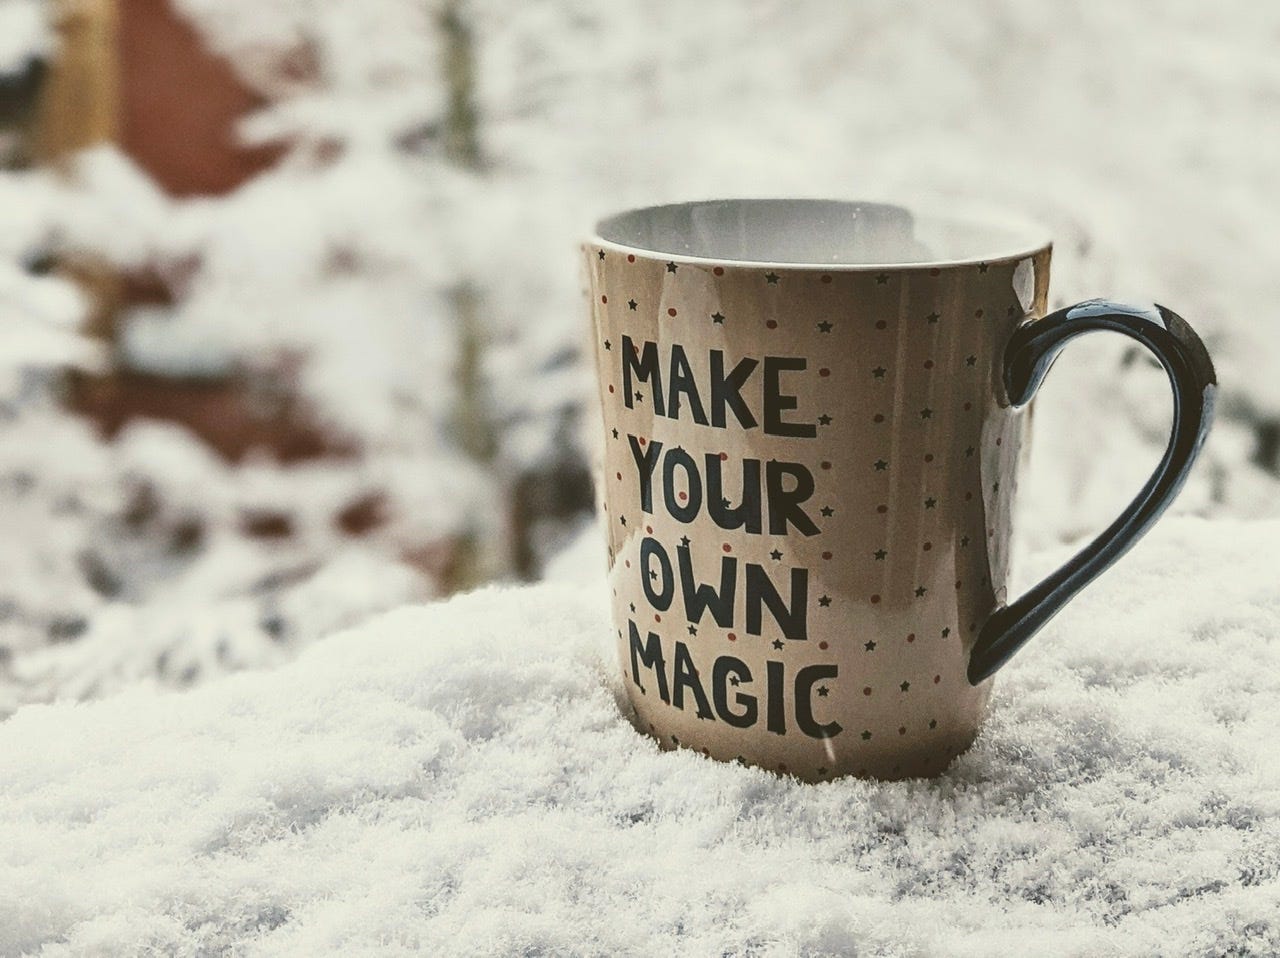 Mug on snow covered outdoor windowsill there is a blurred background of snow covered trees. The mug’s text reads ‘make your own magic’